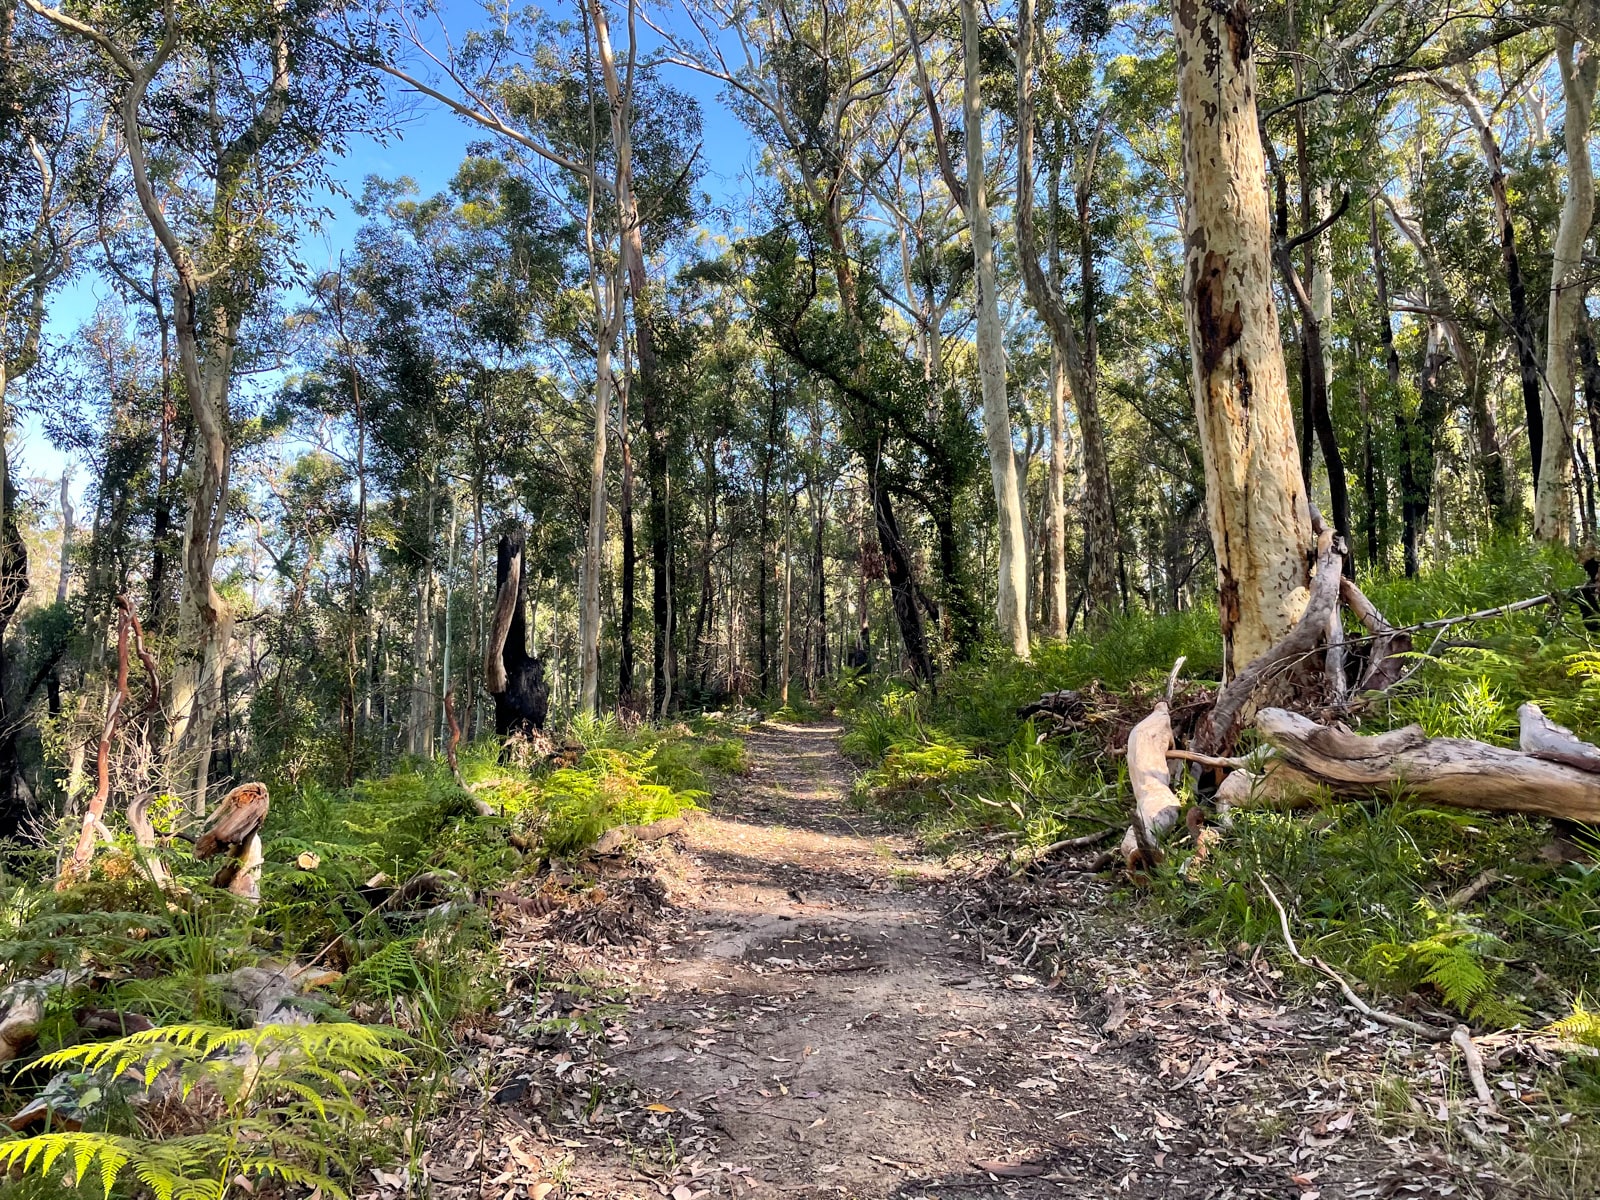 A dusty, well trodden path between many trees in bushland. Some trees can be seen to have fallen.